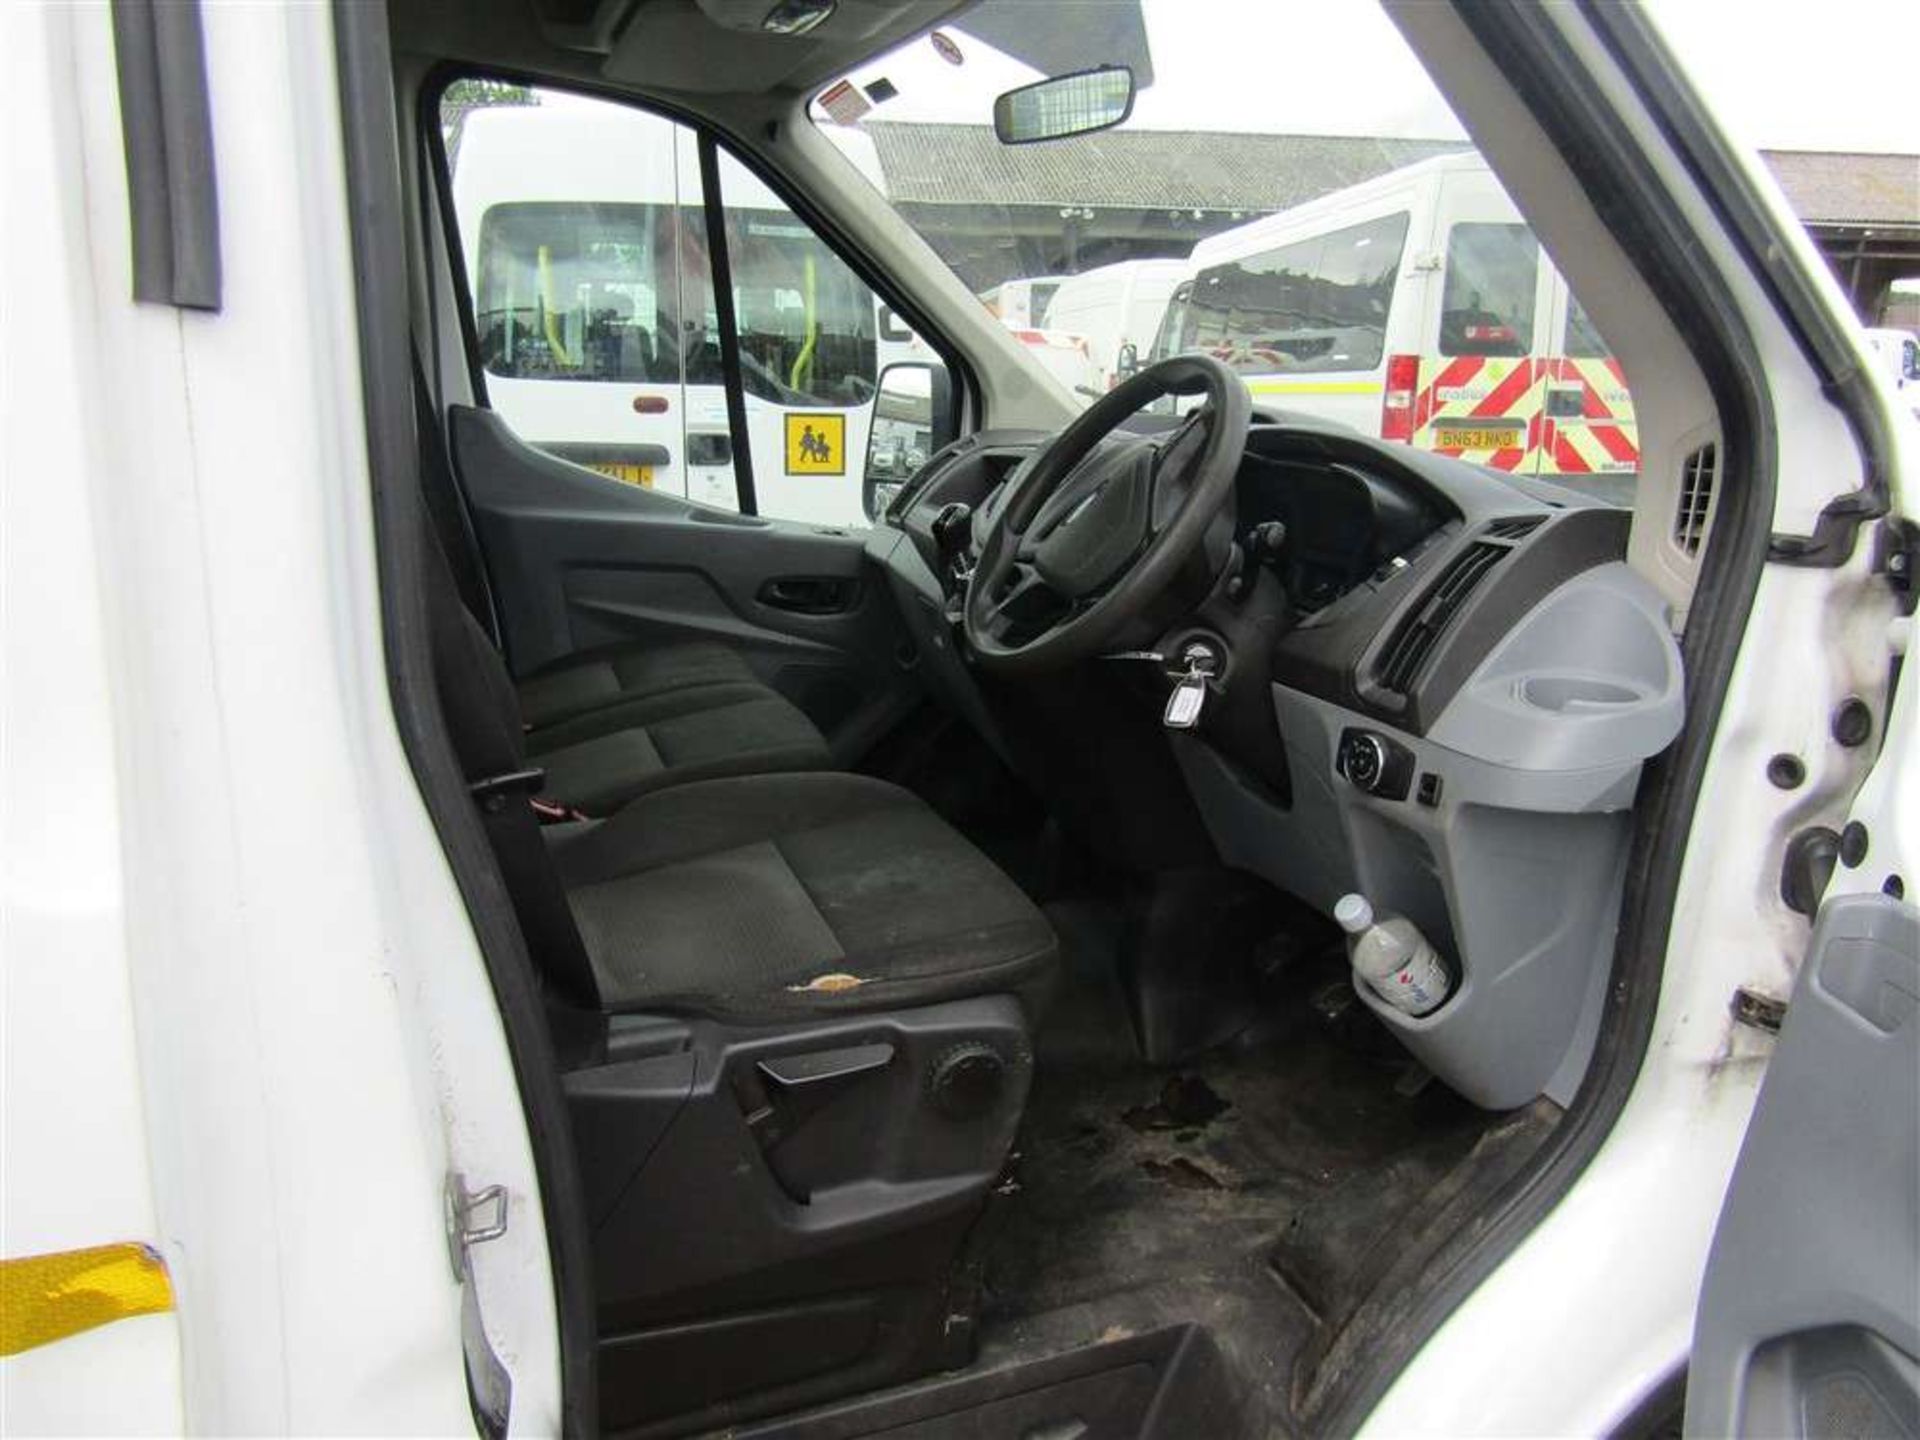 2015 15 Reg Ford Transit 350 Tipper (Direct Council) - Image 6 of 7